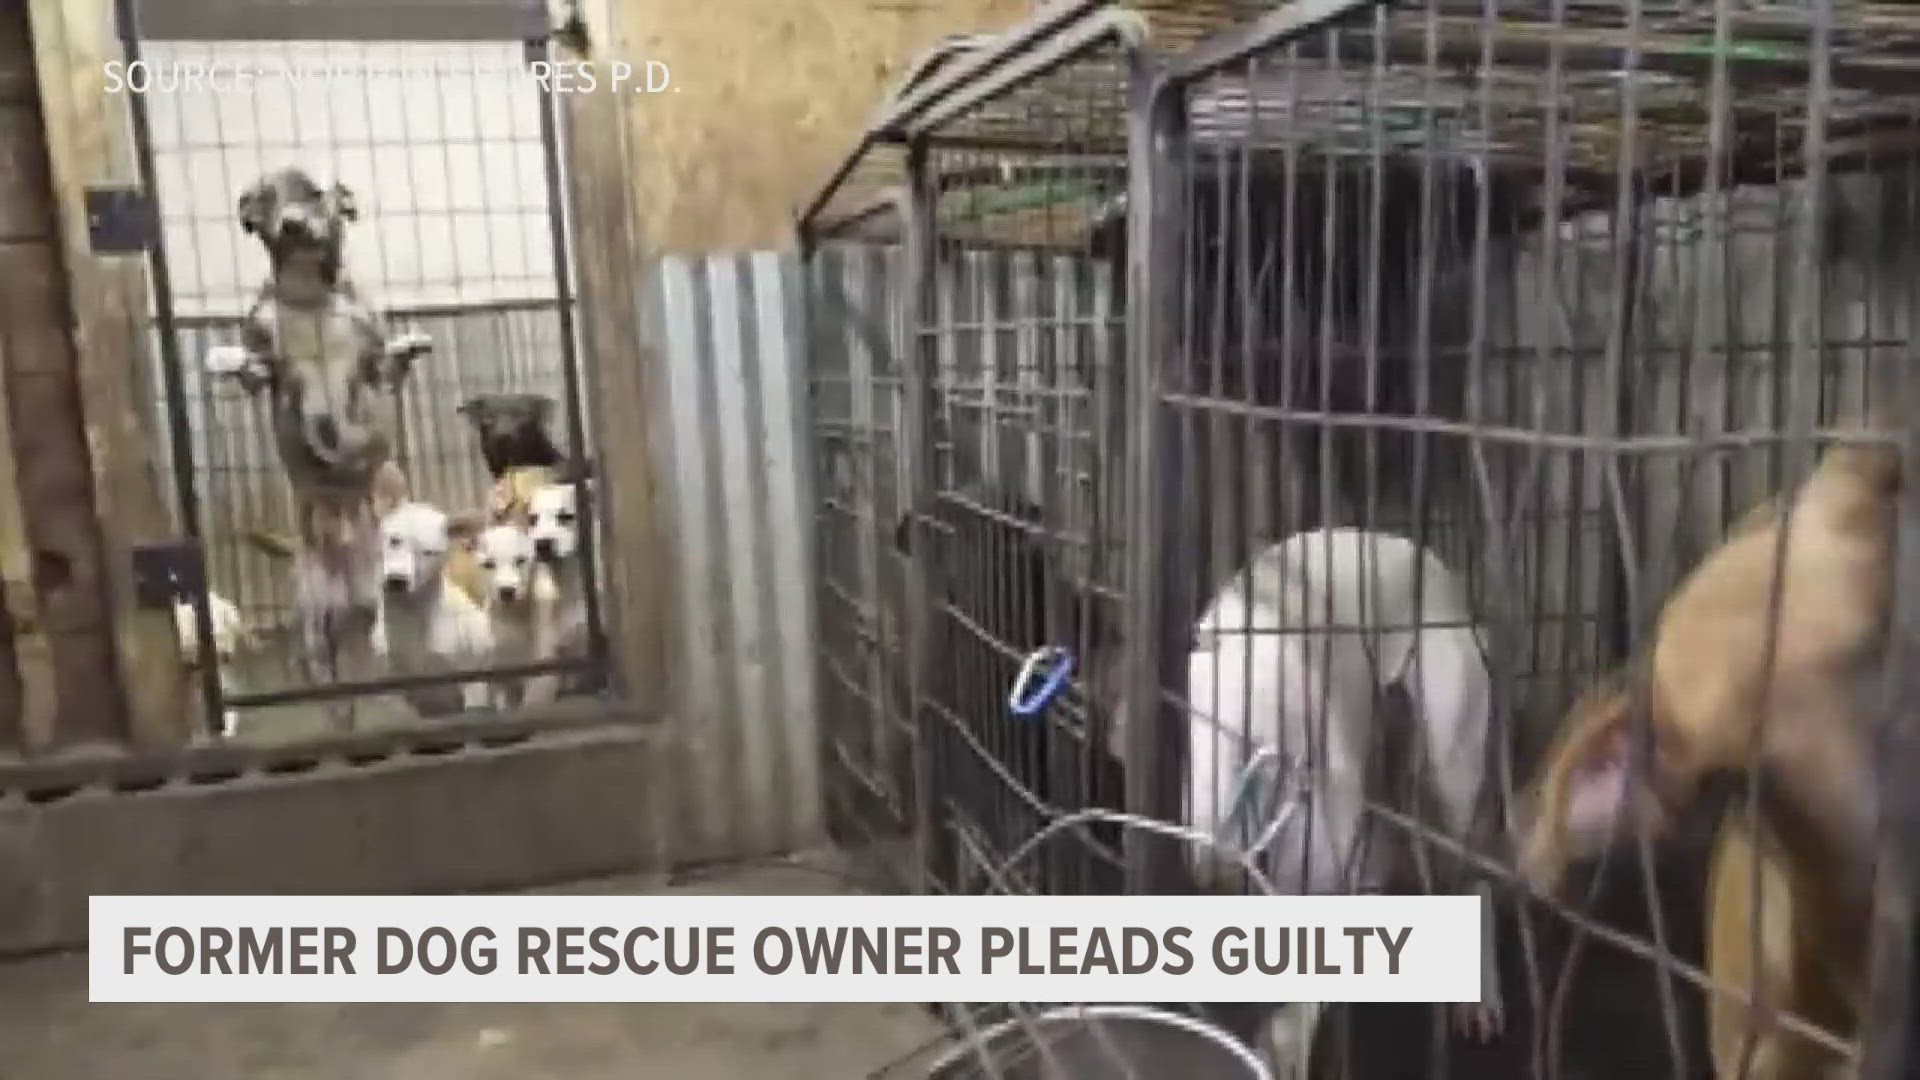 More than a year after 78 dogs were seized from deplorable living conditions, the owner of Cober's Canine Rescue is pleading guilty to animal abuse.